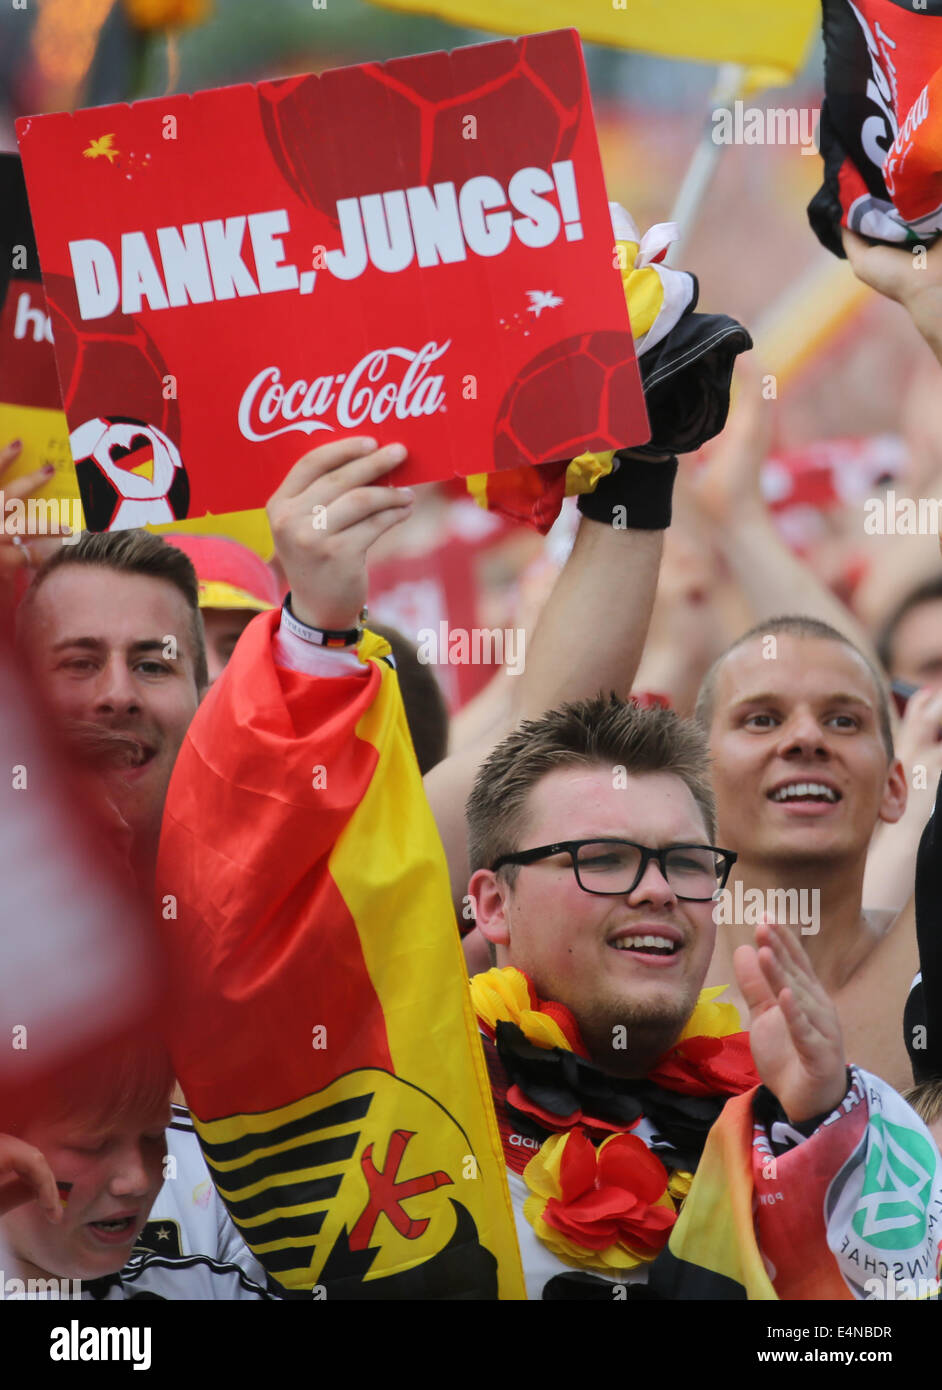 Berlin, Germany. 15th July, 2014. Fans of the German national soccer team celebrate before the reception of the team at the so-called 'Fan Meile' at Brandenburg Gate in Berlin, Germany, 15 July 2014. The German team on 13 July 2014 had won the Brazil 2014 FIFA Soccer World Cup final against Argentina by 1-0 to win the title for the fourth time after 1954, 1974 and 1990. /Alamy Live News Stock Photo